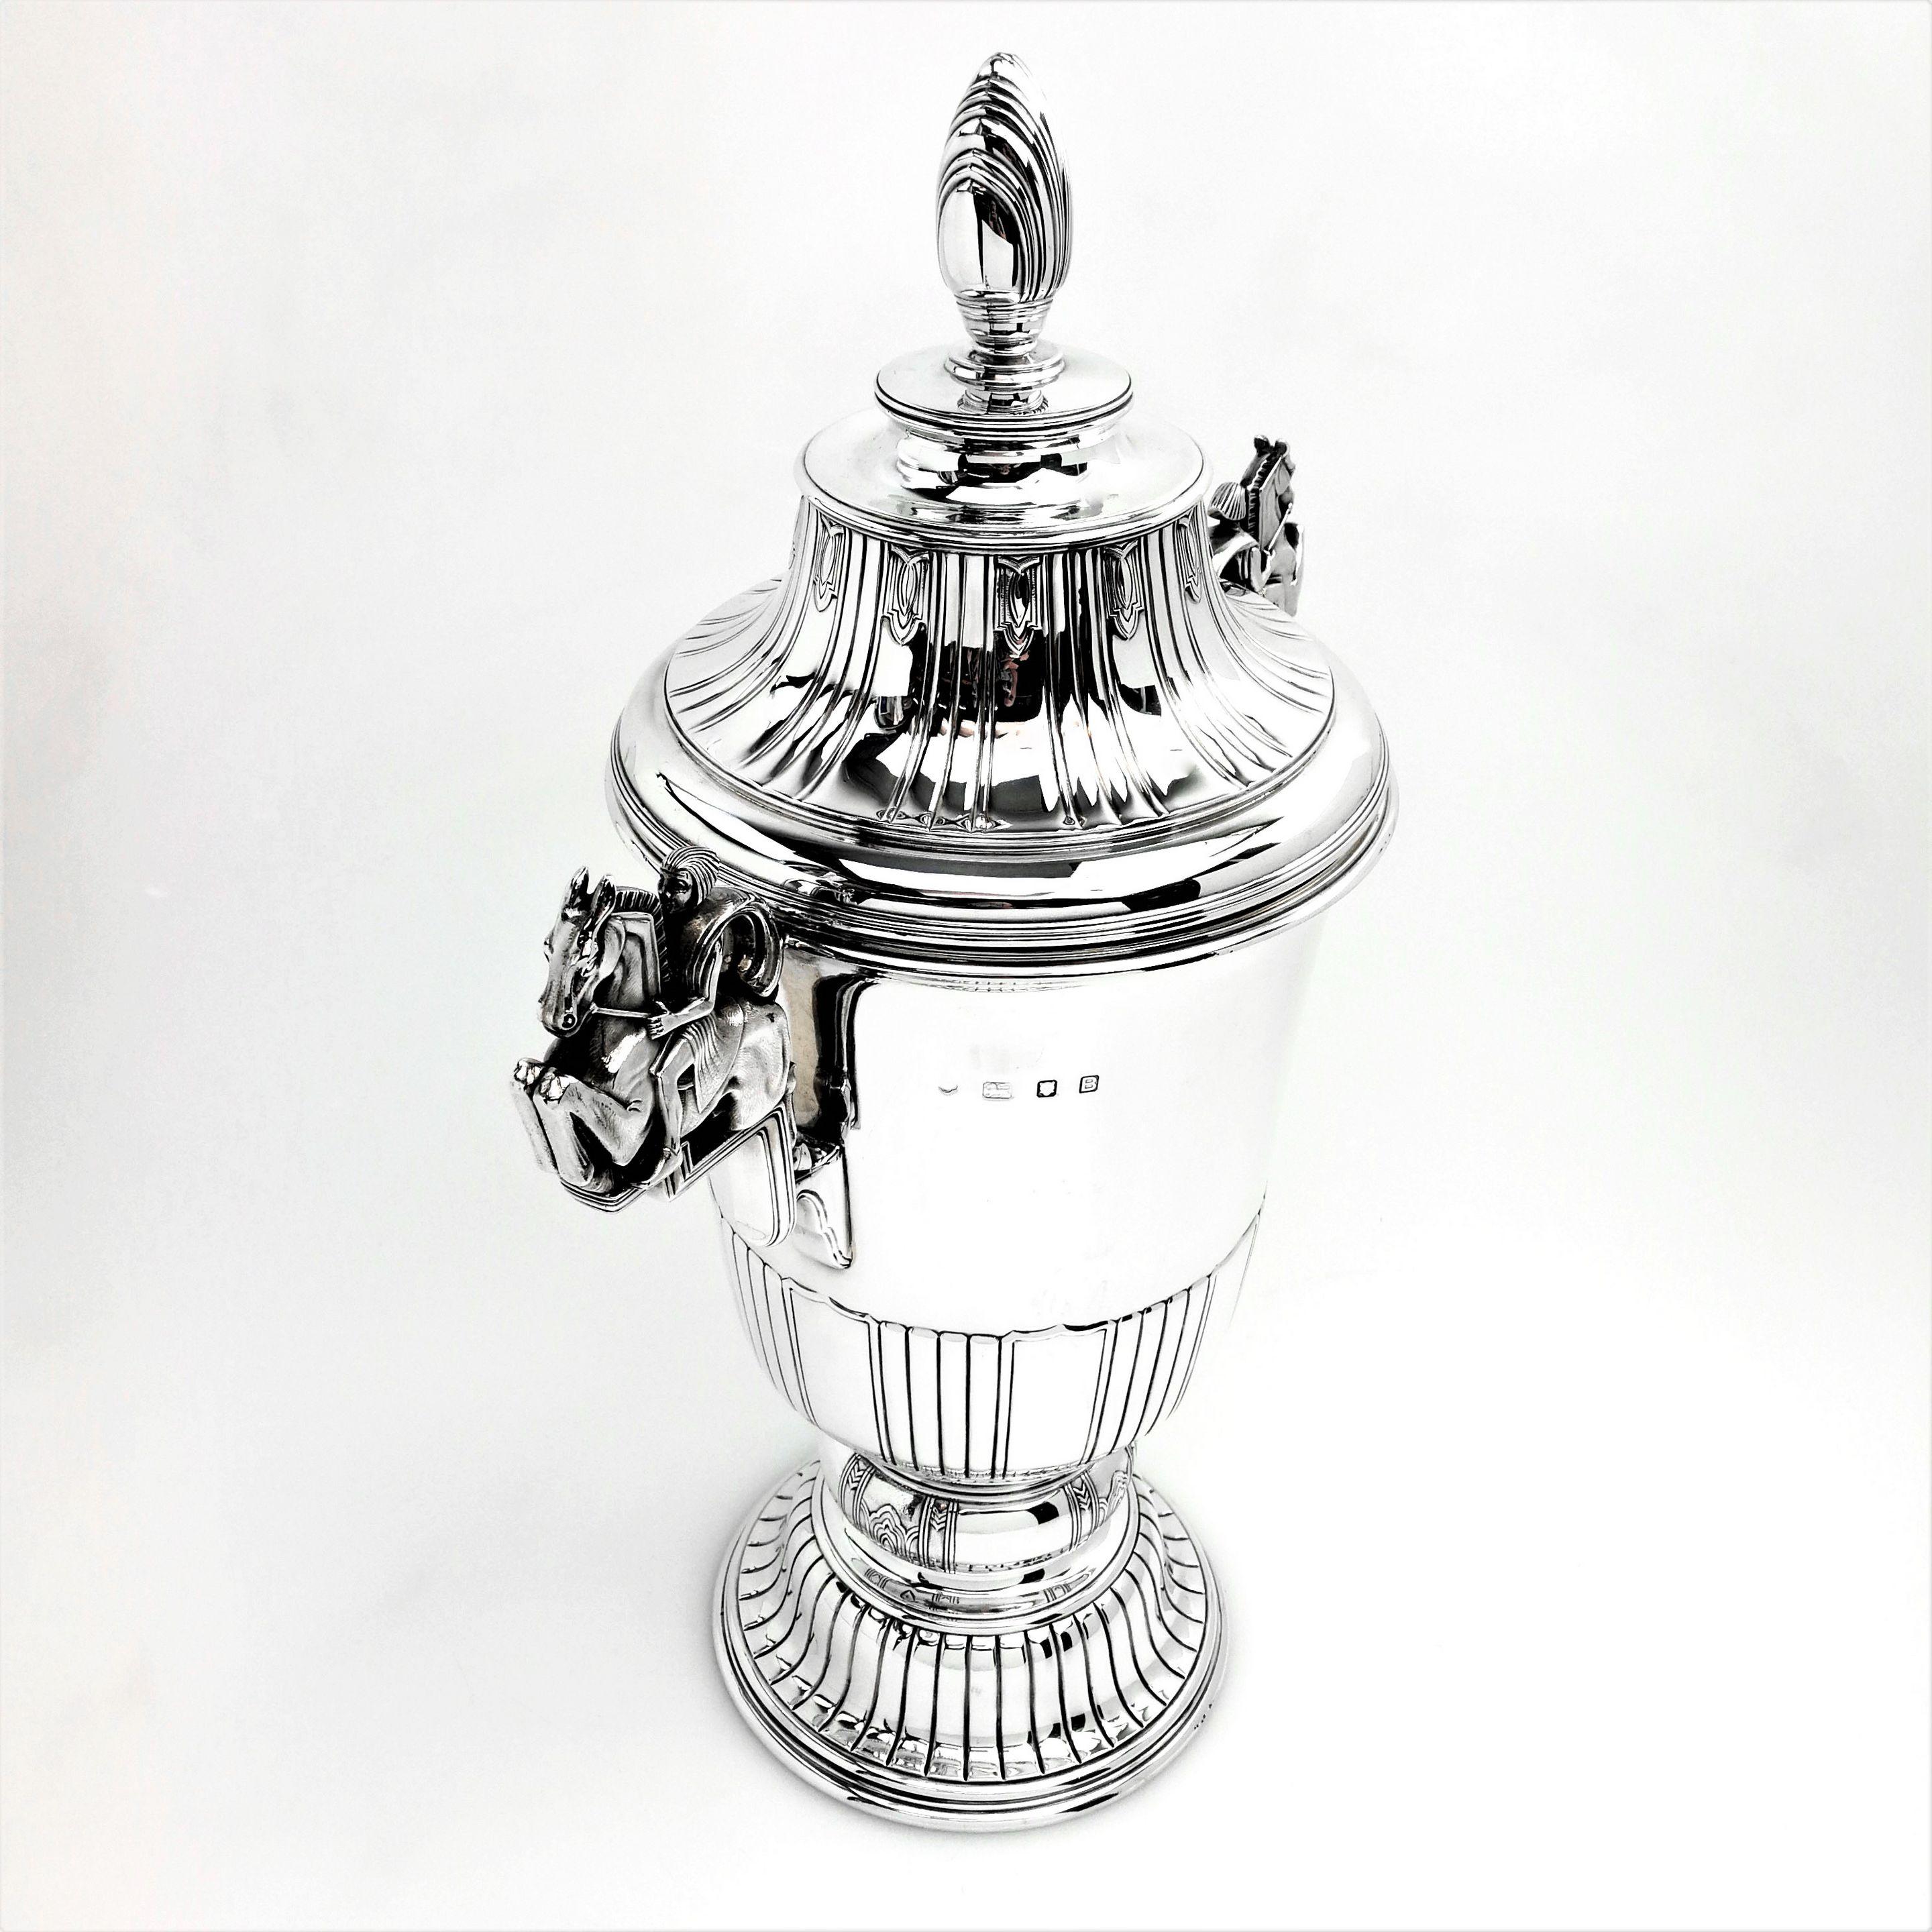 A magnificent solid silver Art Deco Cup & Cover / trophy. This impressive piece exemplifies the strong design elements typical of the Art Deco period, and is of notably substantial size and weight. The tall Cup stands on a spread pedestal foot and